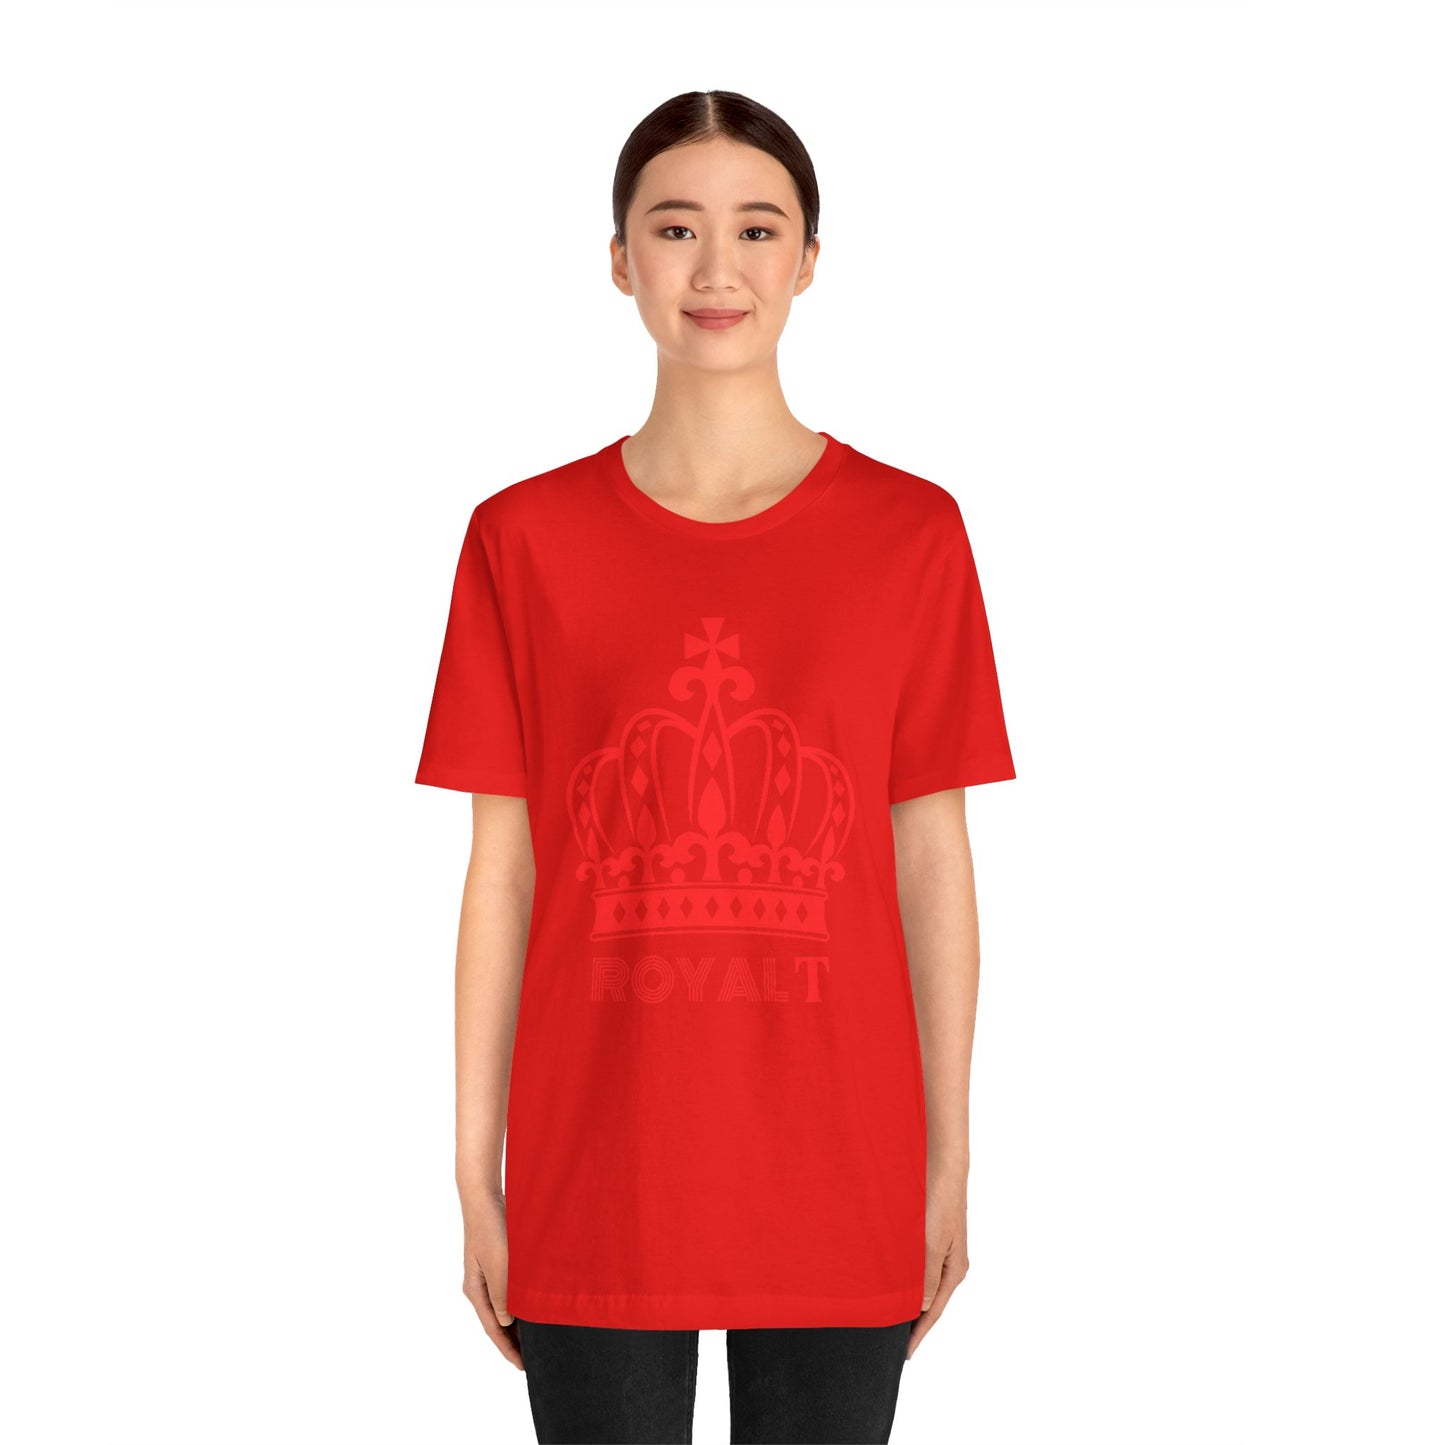 Poppy Red - Unisex Jersey Short Sleeve T Shirt - Red Royal T